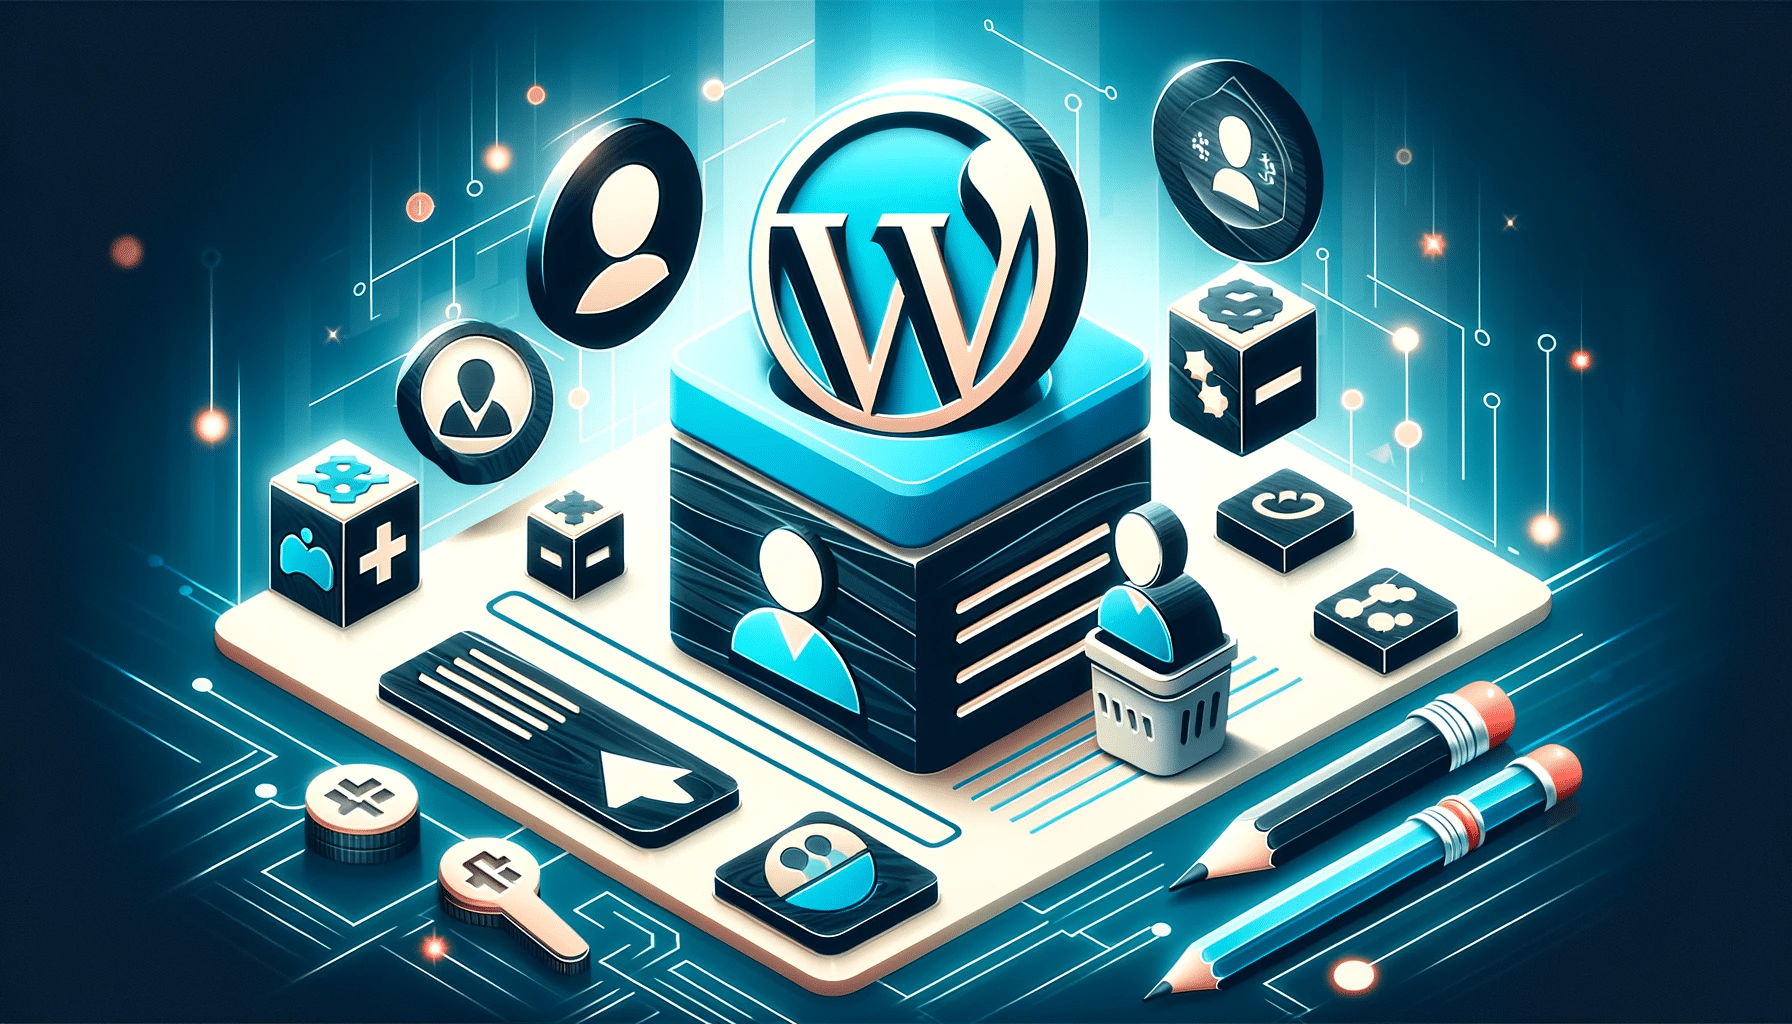 This is a digital illustration featuring WordPress logo and icons related to web development, such as plugins, themes, and social media, in a futuristic neon style.